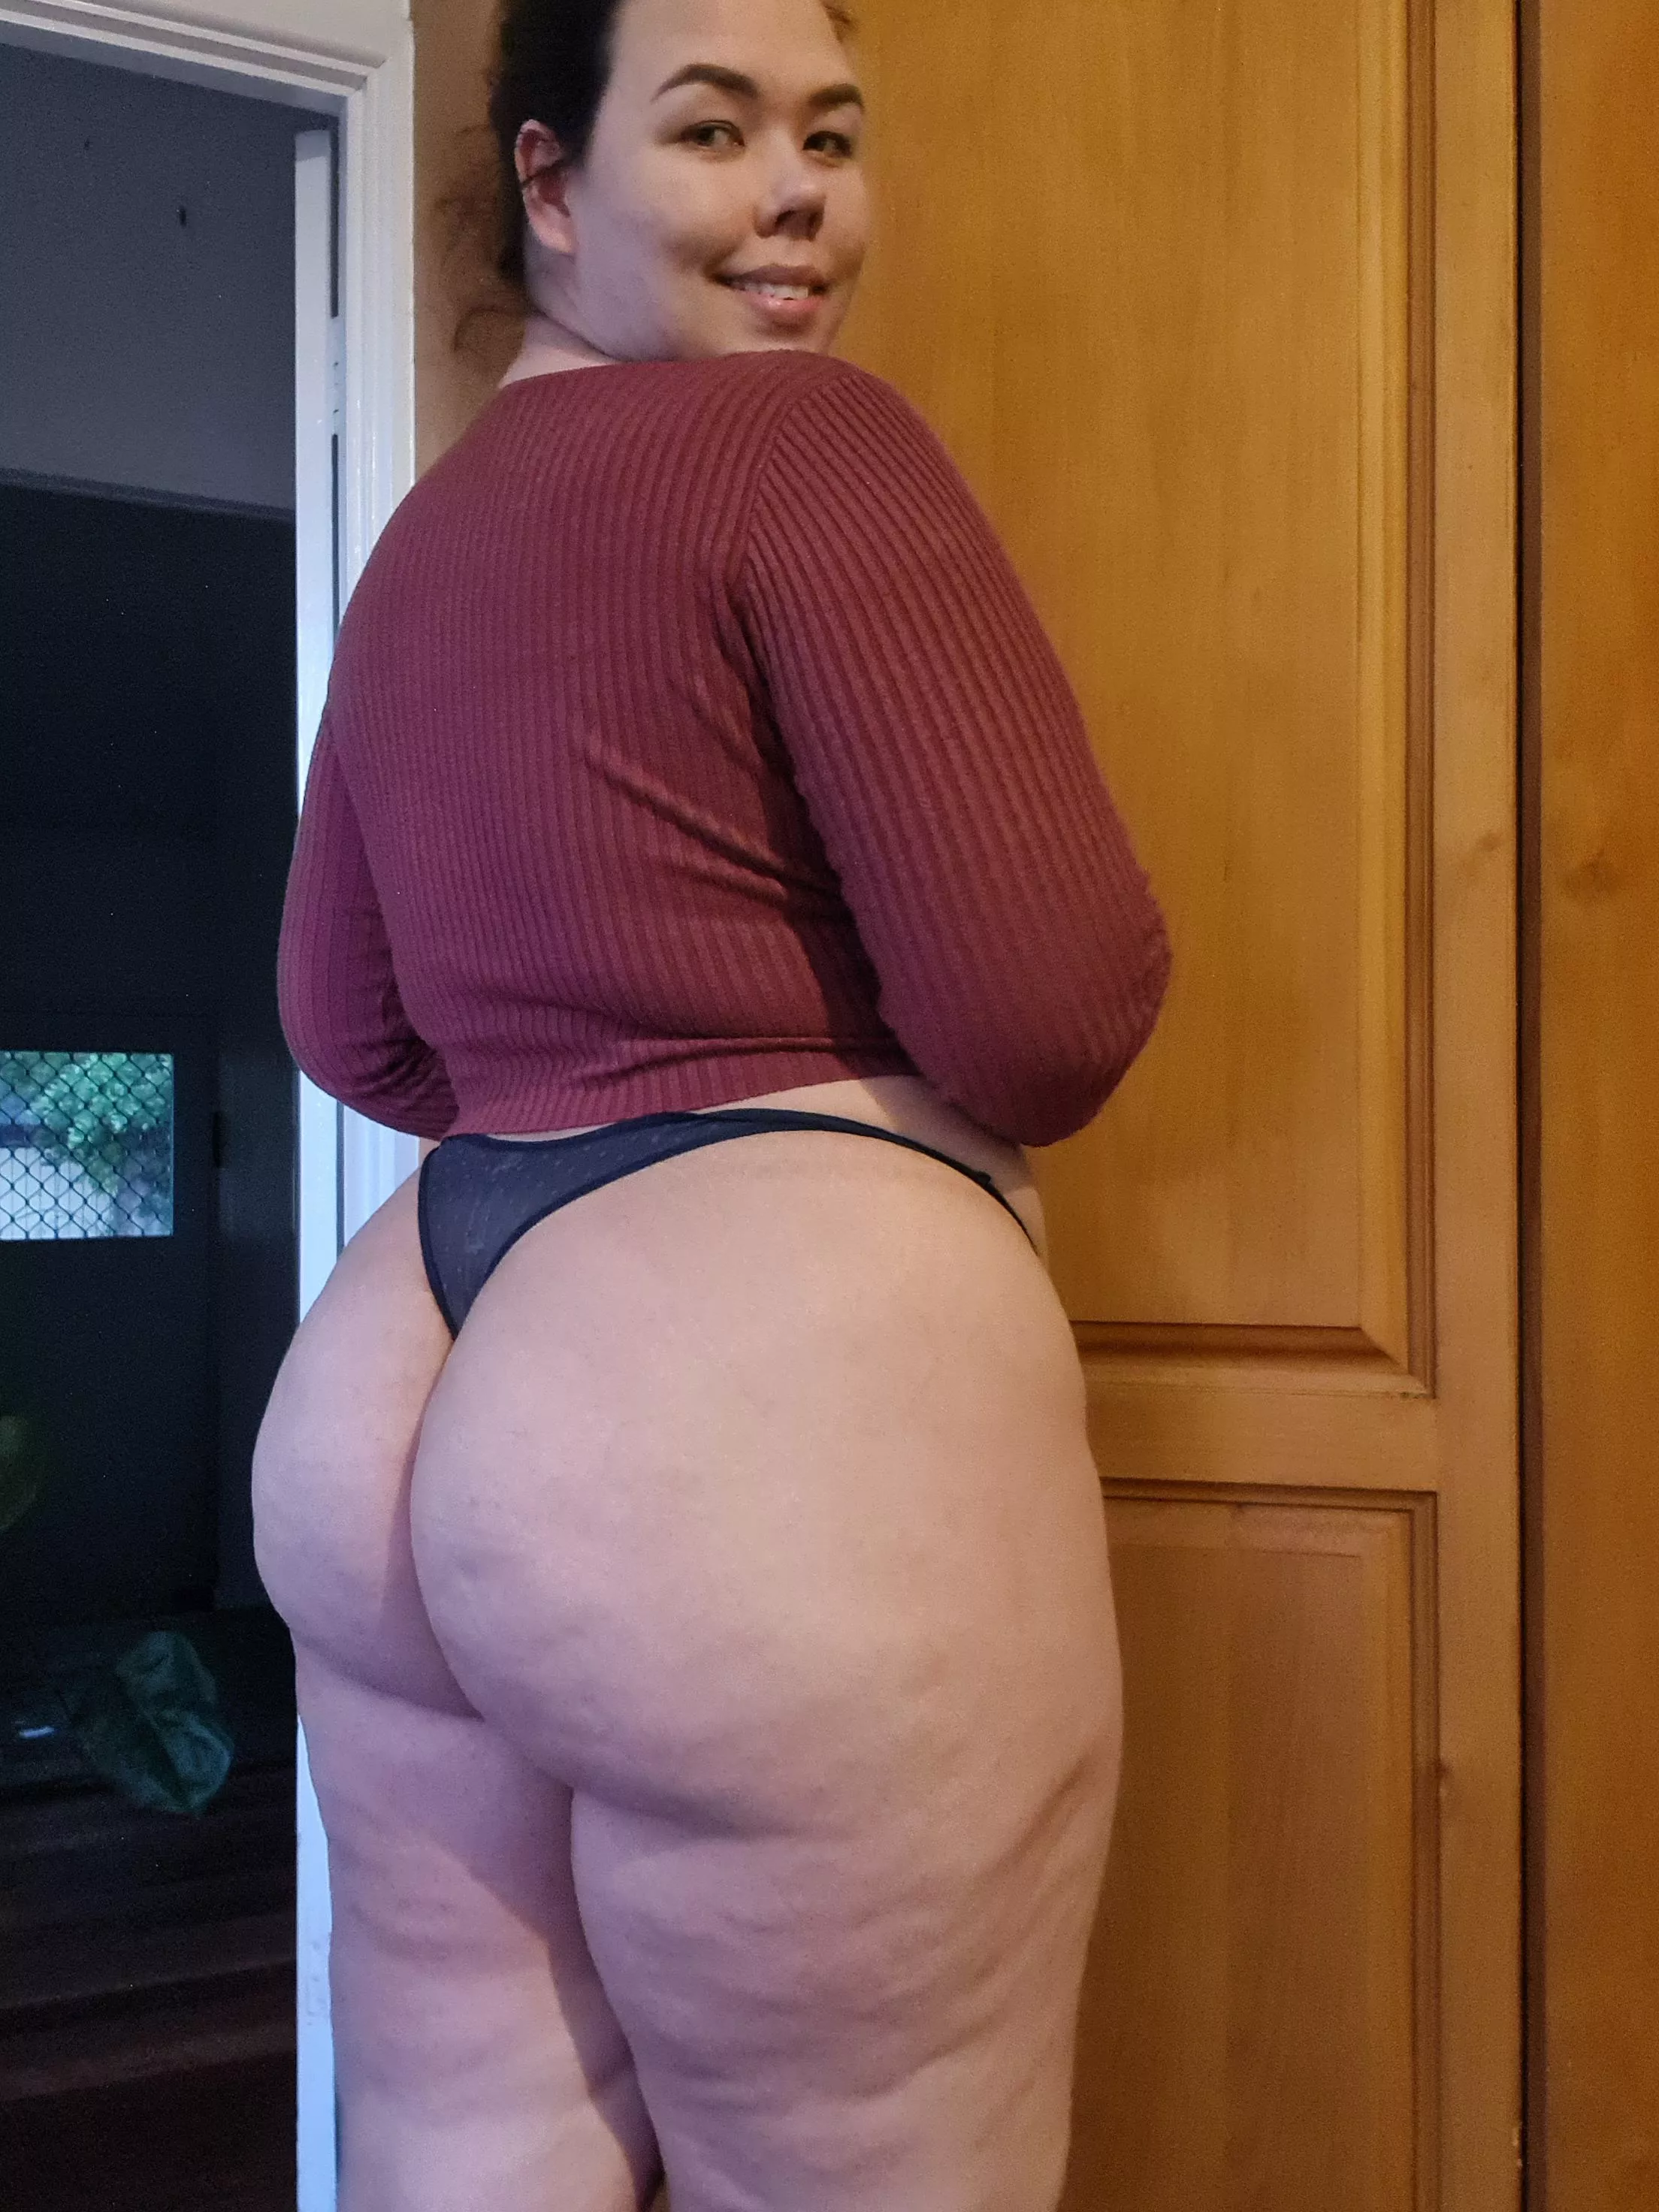 I hope my smile and big booty brighten your day!